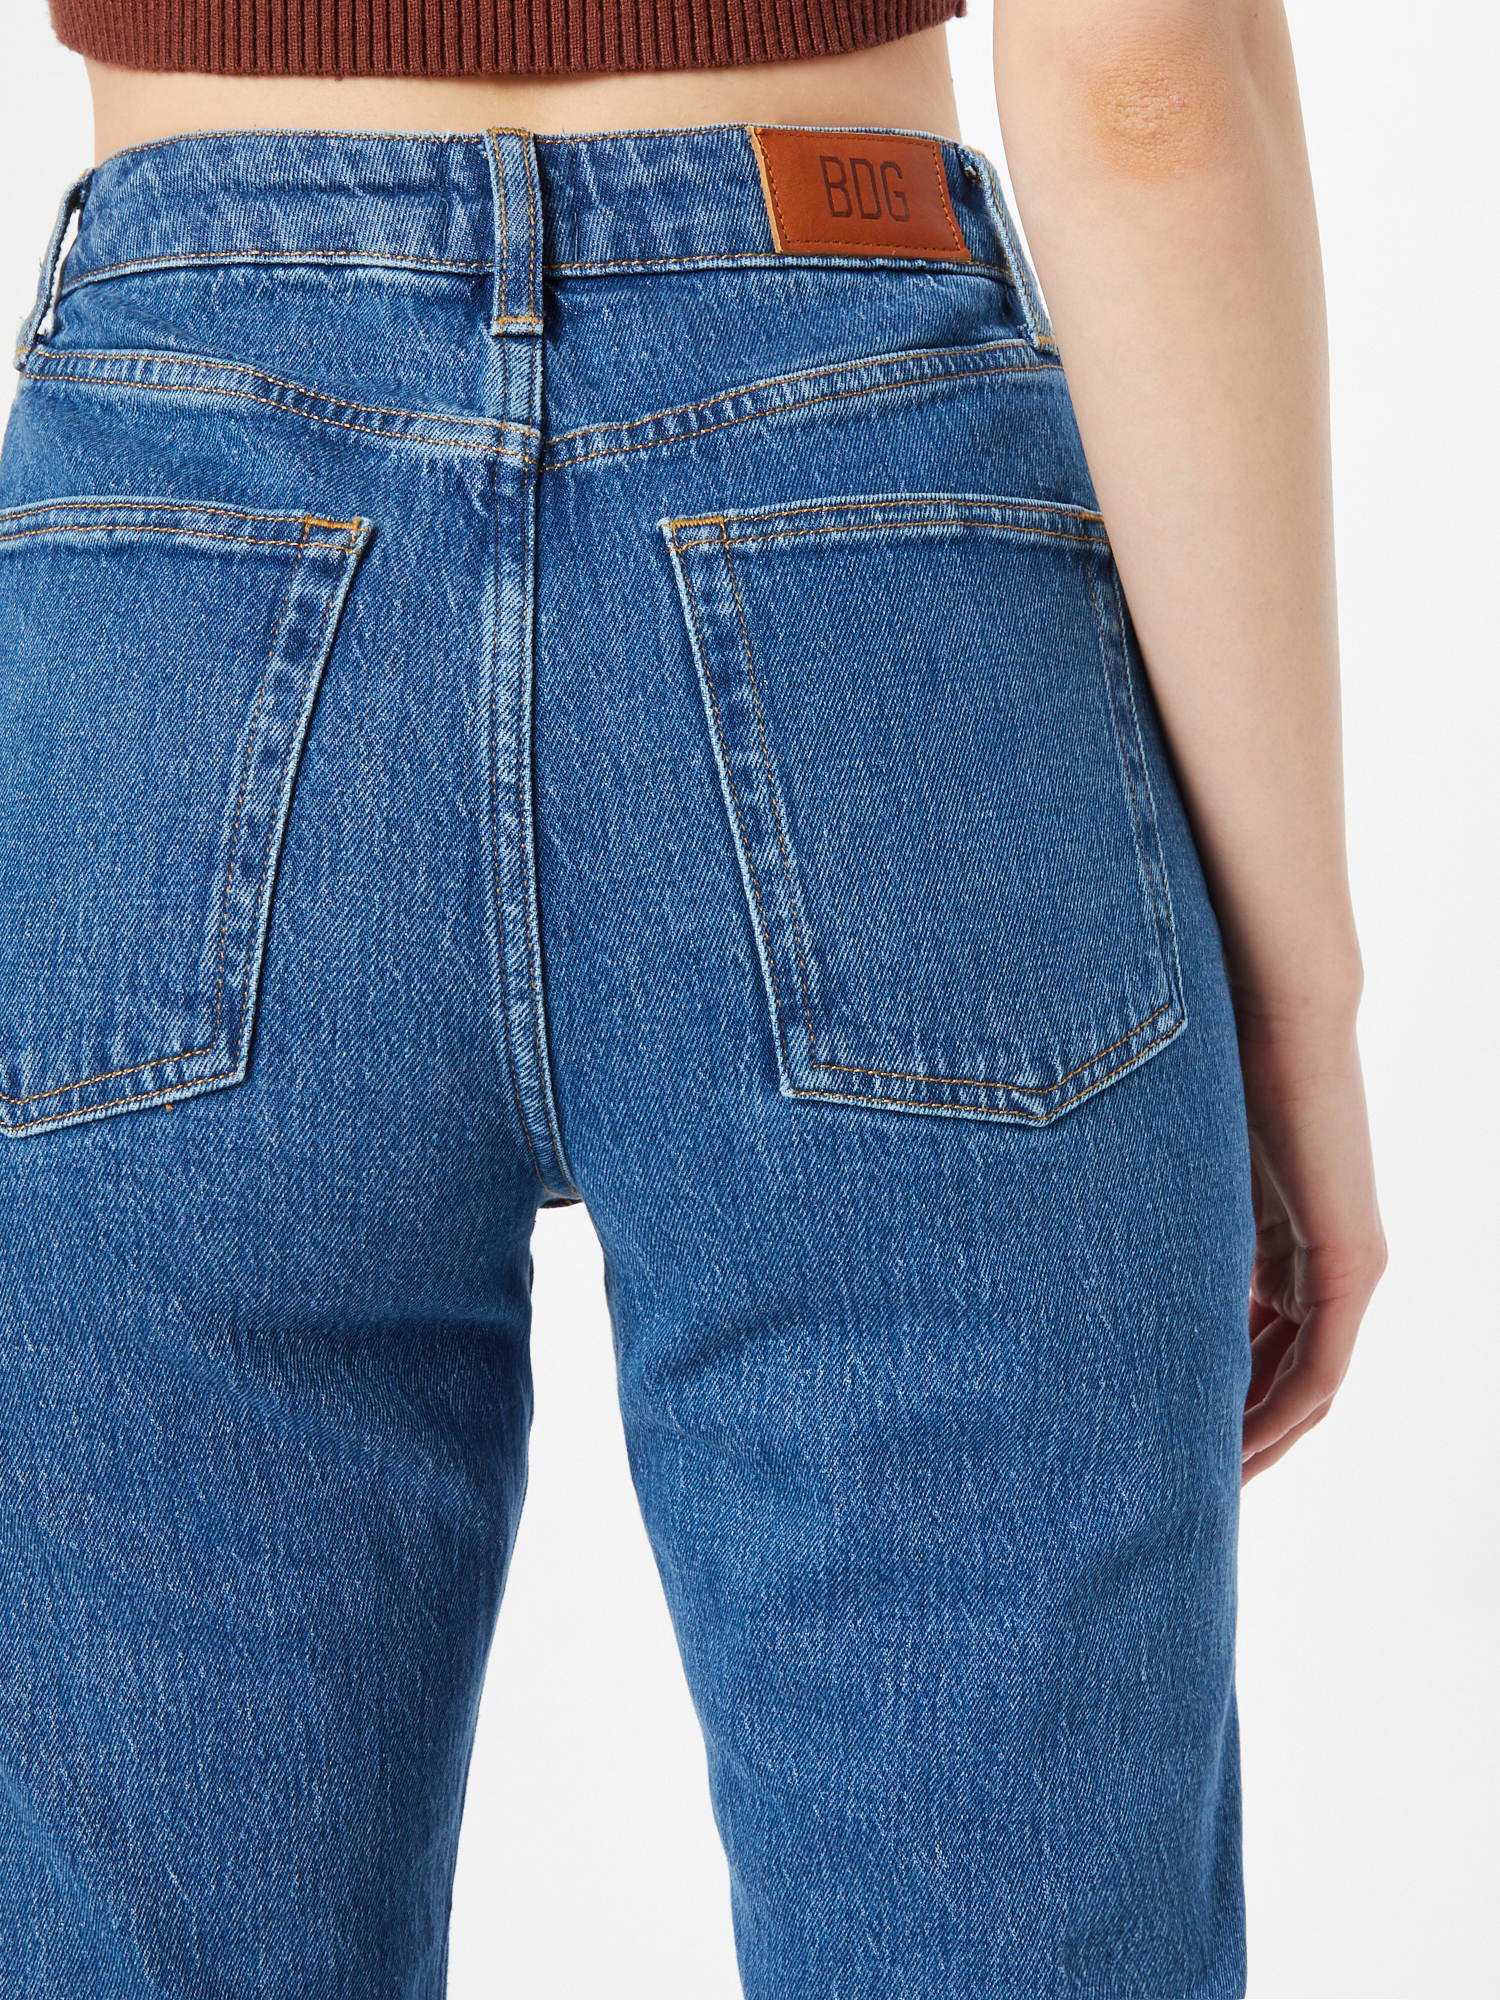 Donna Nuovi arrivi BDG Urban Outfitters Jeans DILLON RECY in Blu 